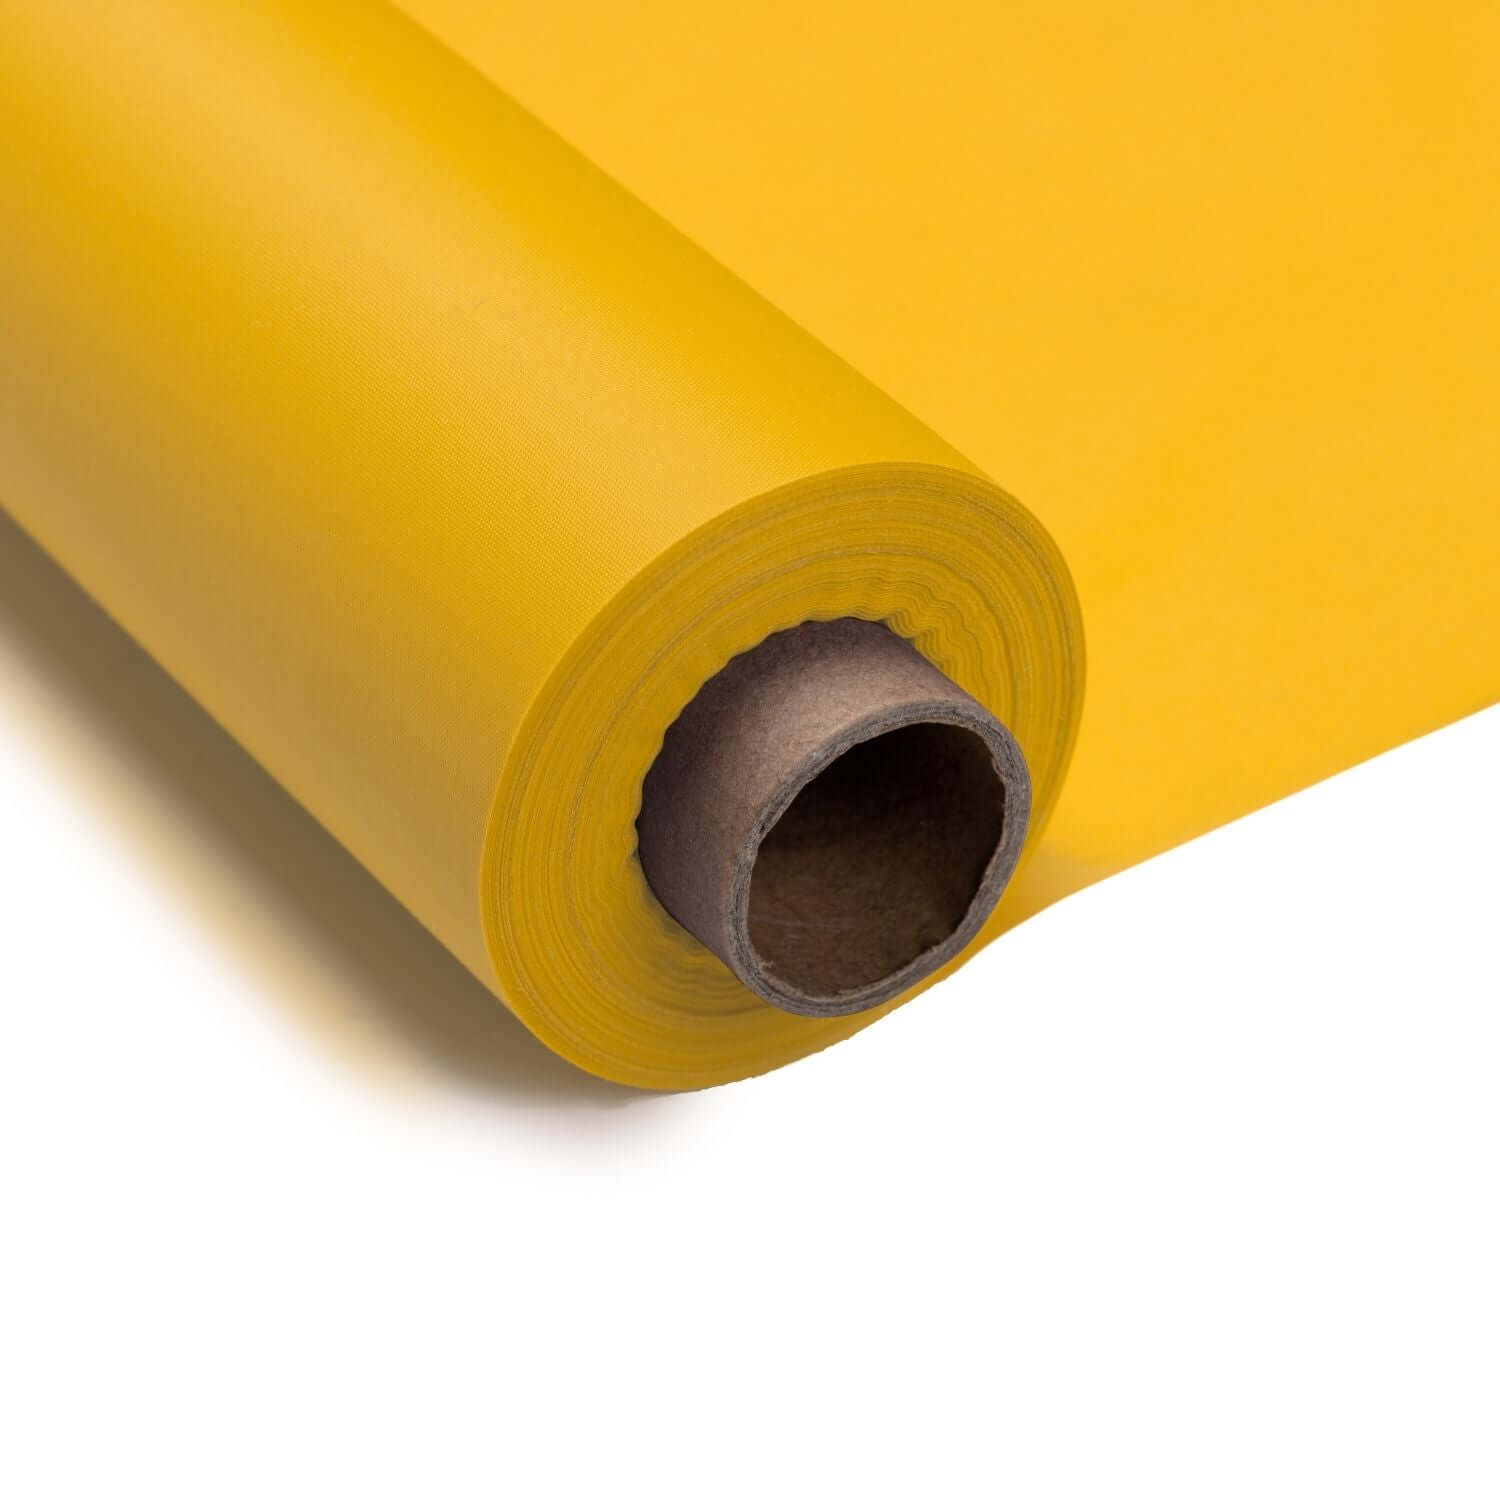 40 In. X 300 Ft. Premium Yellow Plastic Table Roll | 4 Pack - Yom Tov Settings